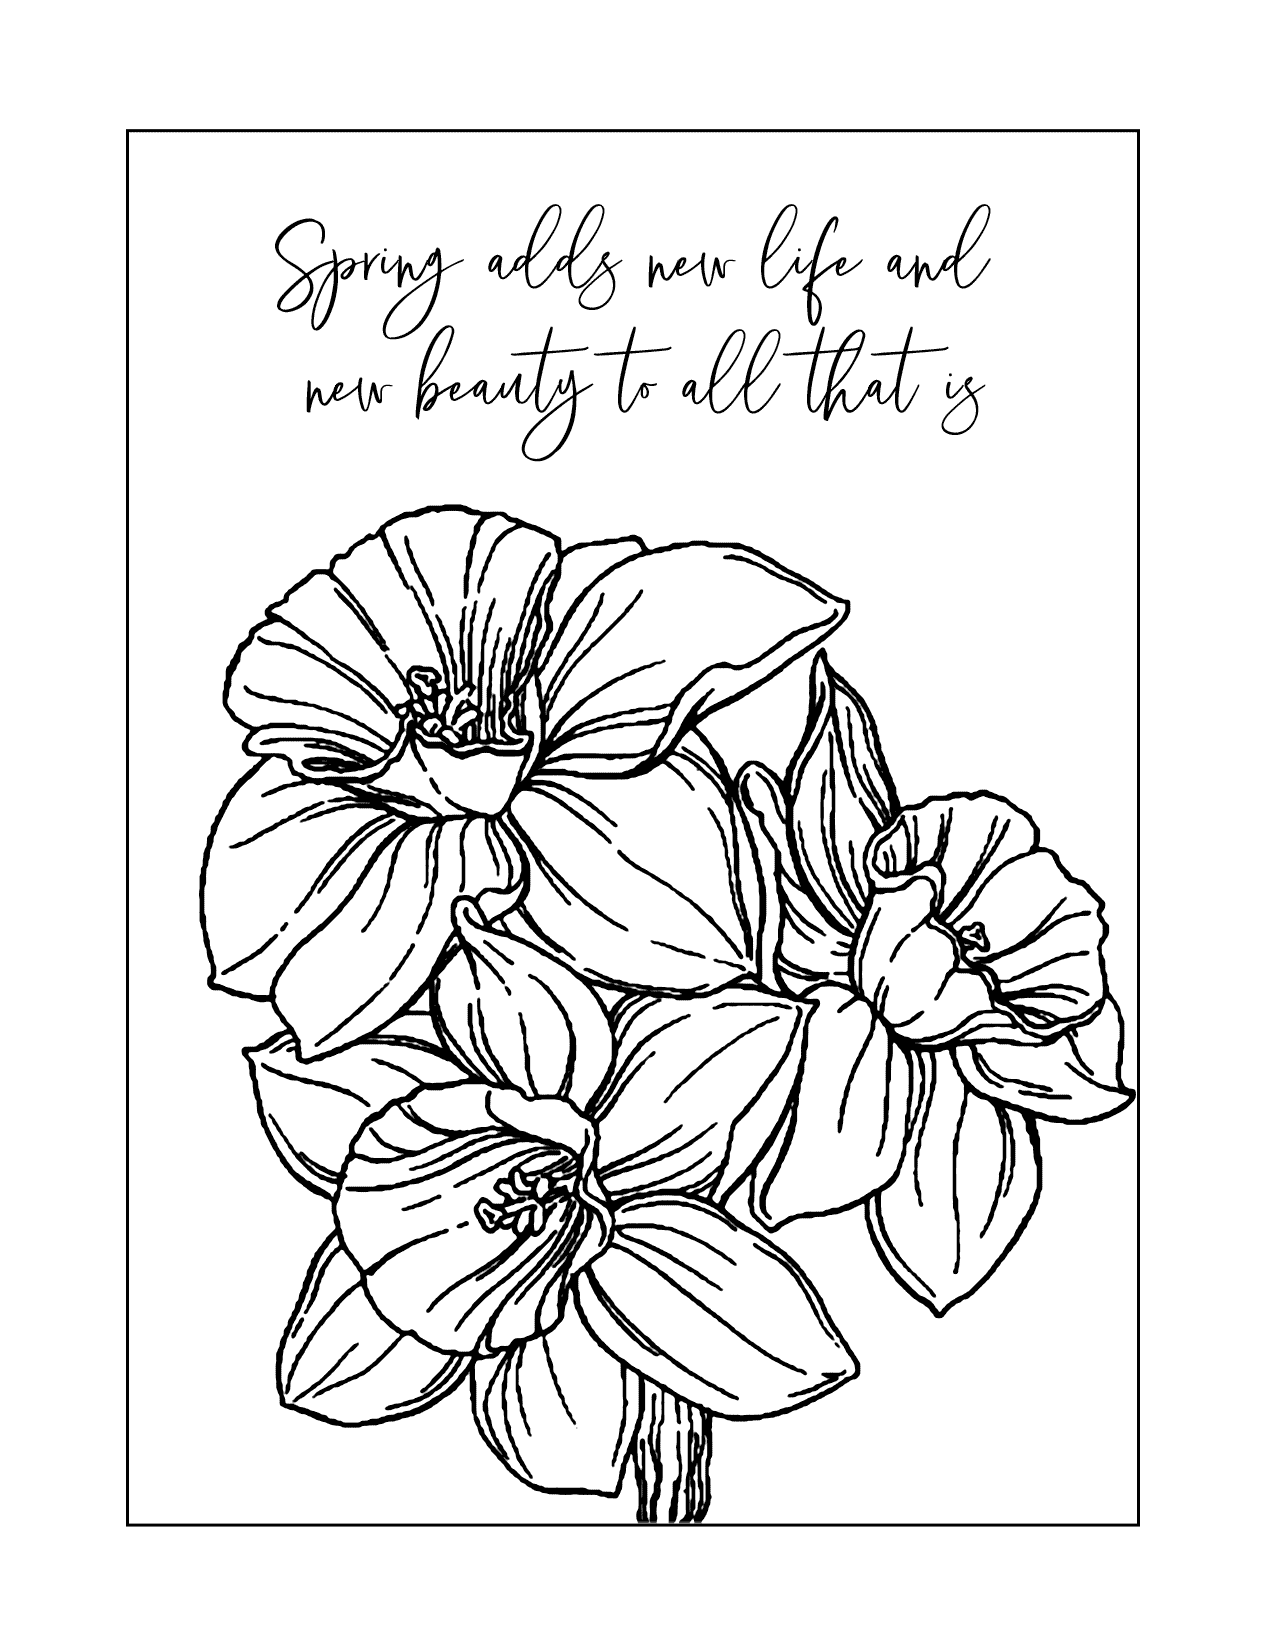 Spring Saying With Daffodil Coloring Page